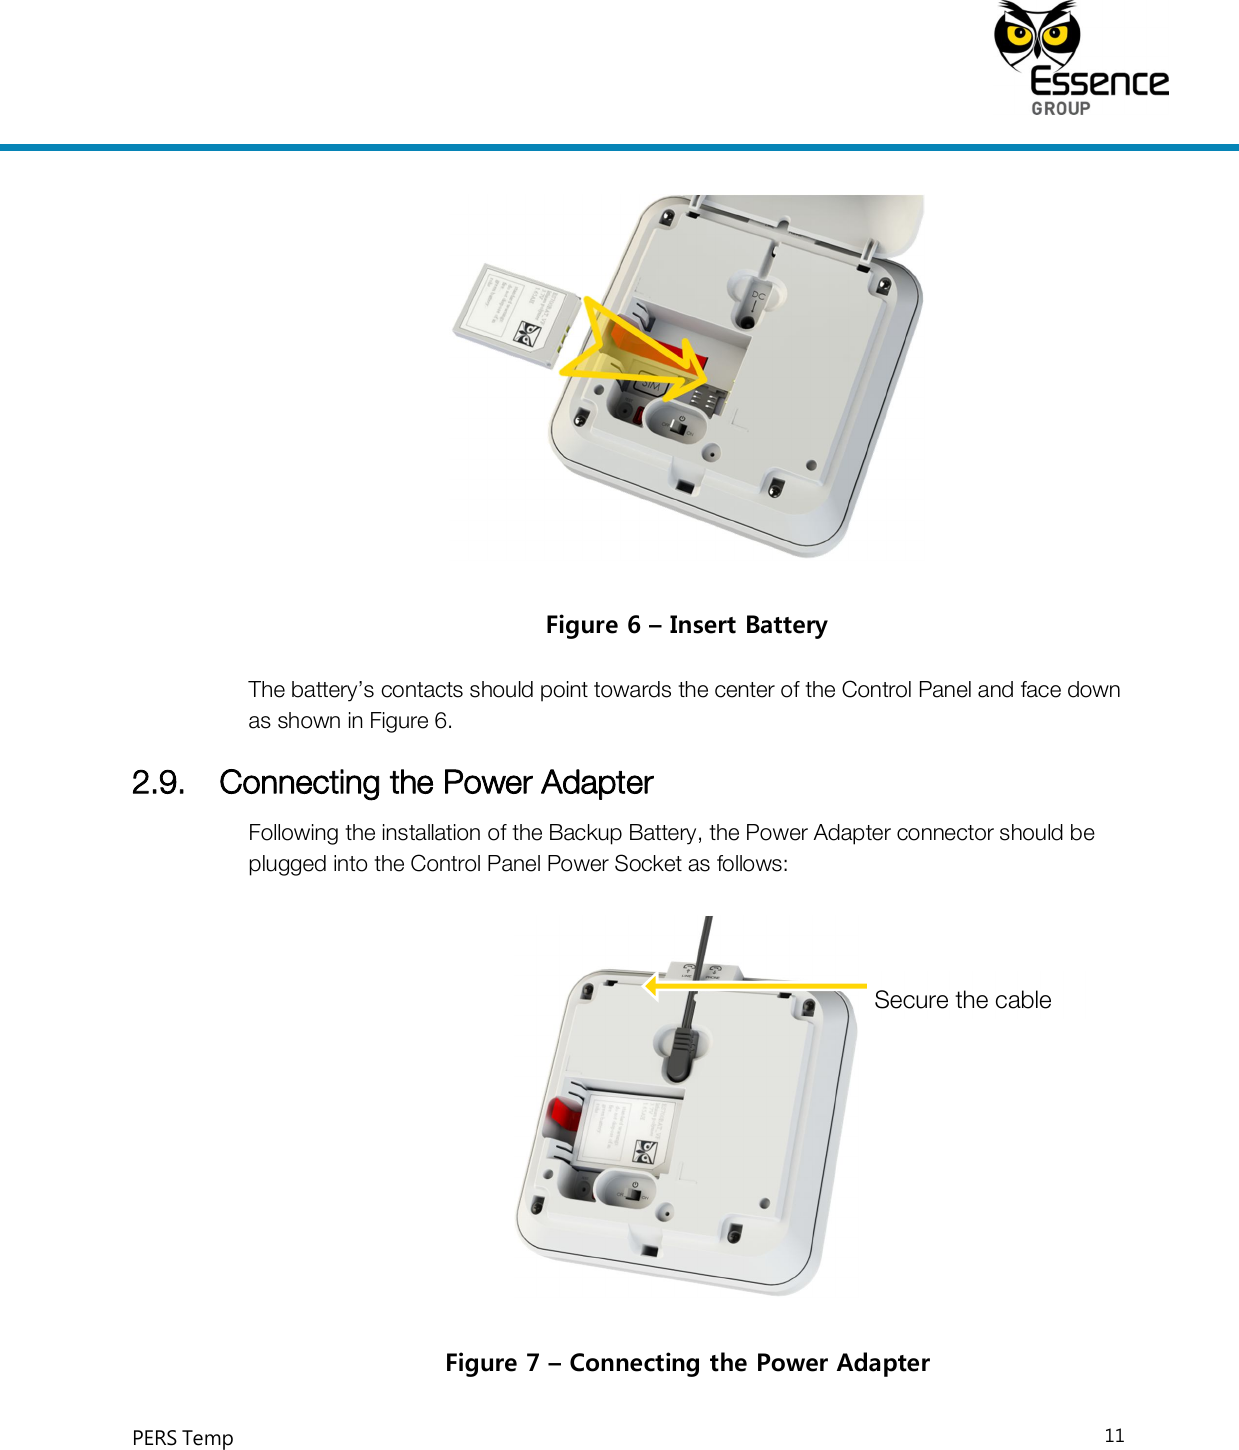     PERS Temp    11   Figure 6 – Insert Battery  The battery’s contacts should point towards the center of the Control Panel and face down as shown in Figure 6. 2.9. Connecting the Power Adapter Following the installation of the Backup Battery, the Power Adapter connector should be plugged into the Control Panel Power Socket as follows:  Figure 7 – Connecting the Power Adapter Secure the cable 